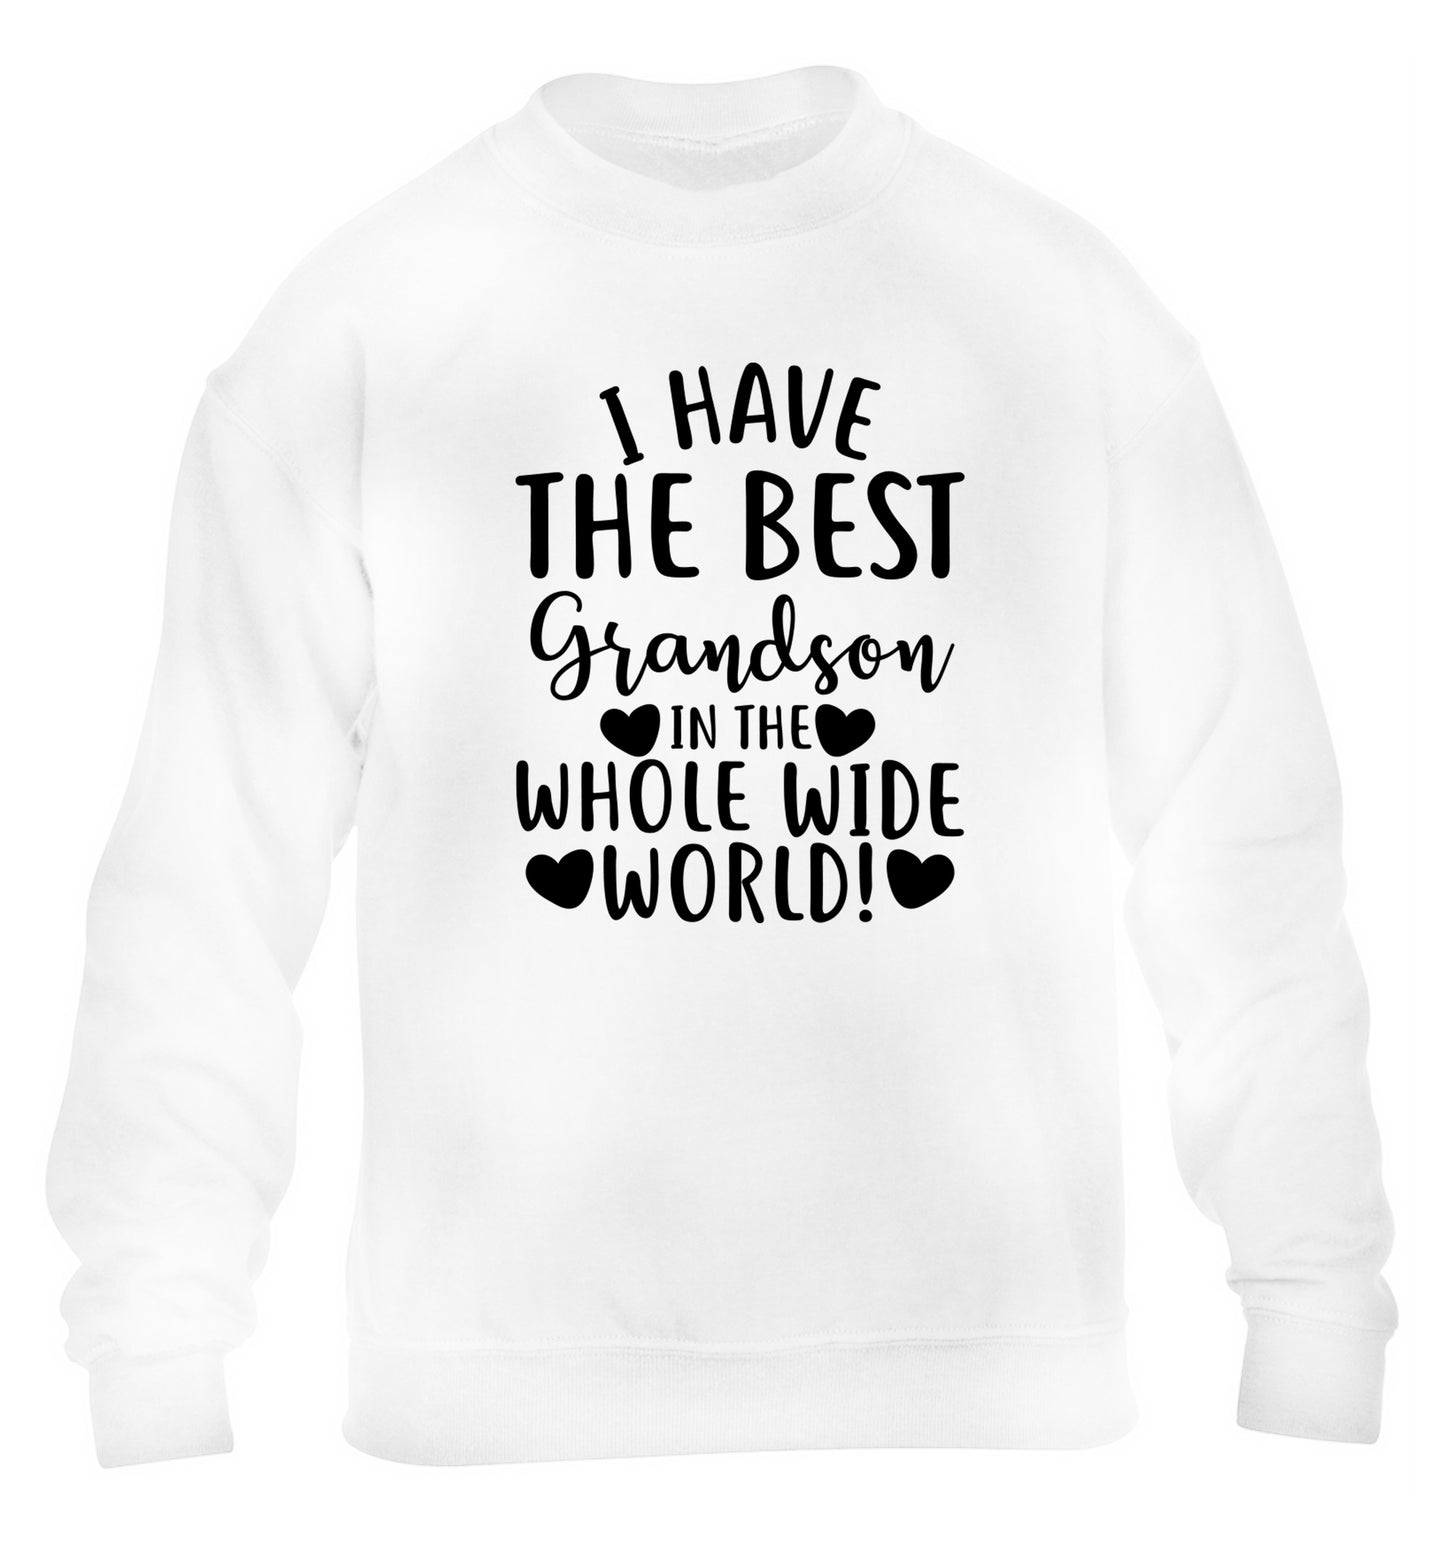 I have the best grandson in the whole wide world! children's white sweater 12-13 Years